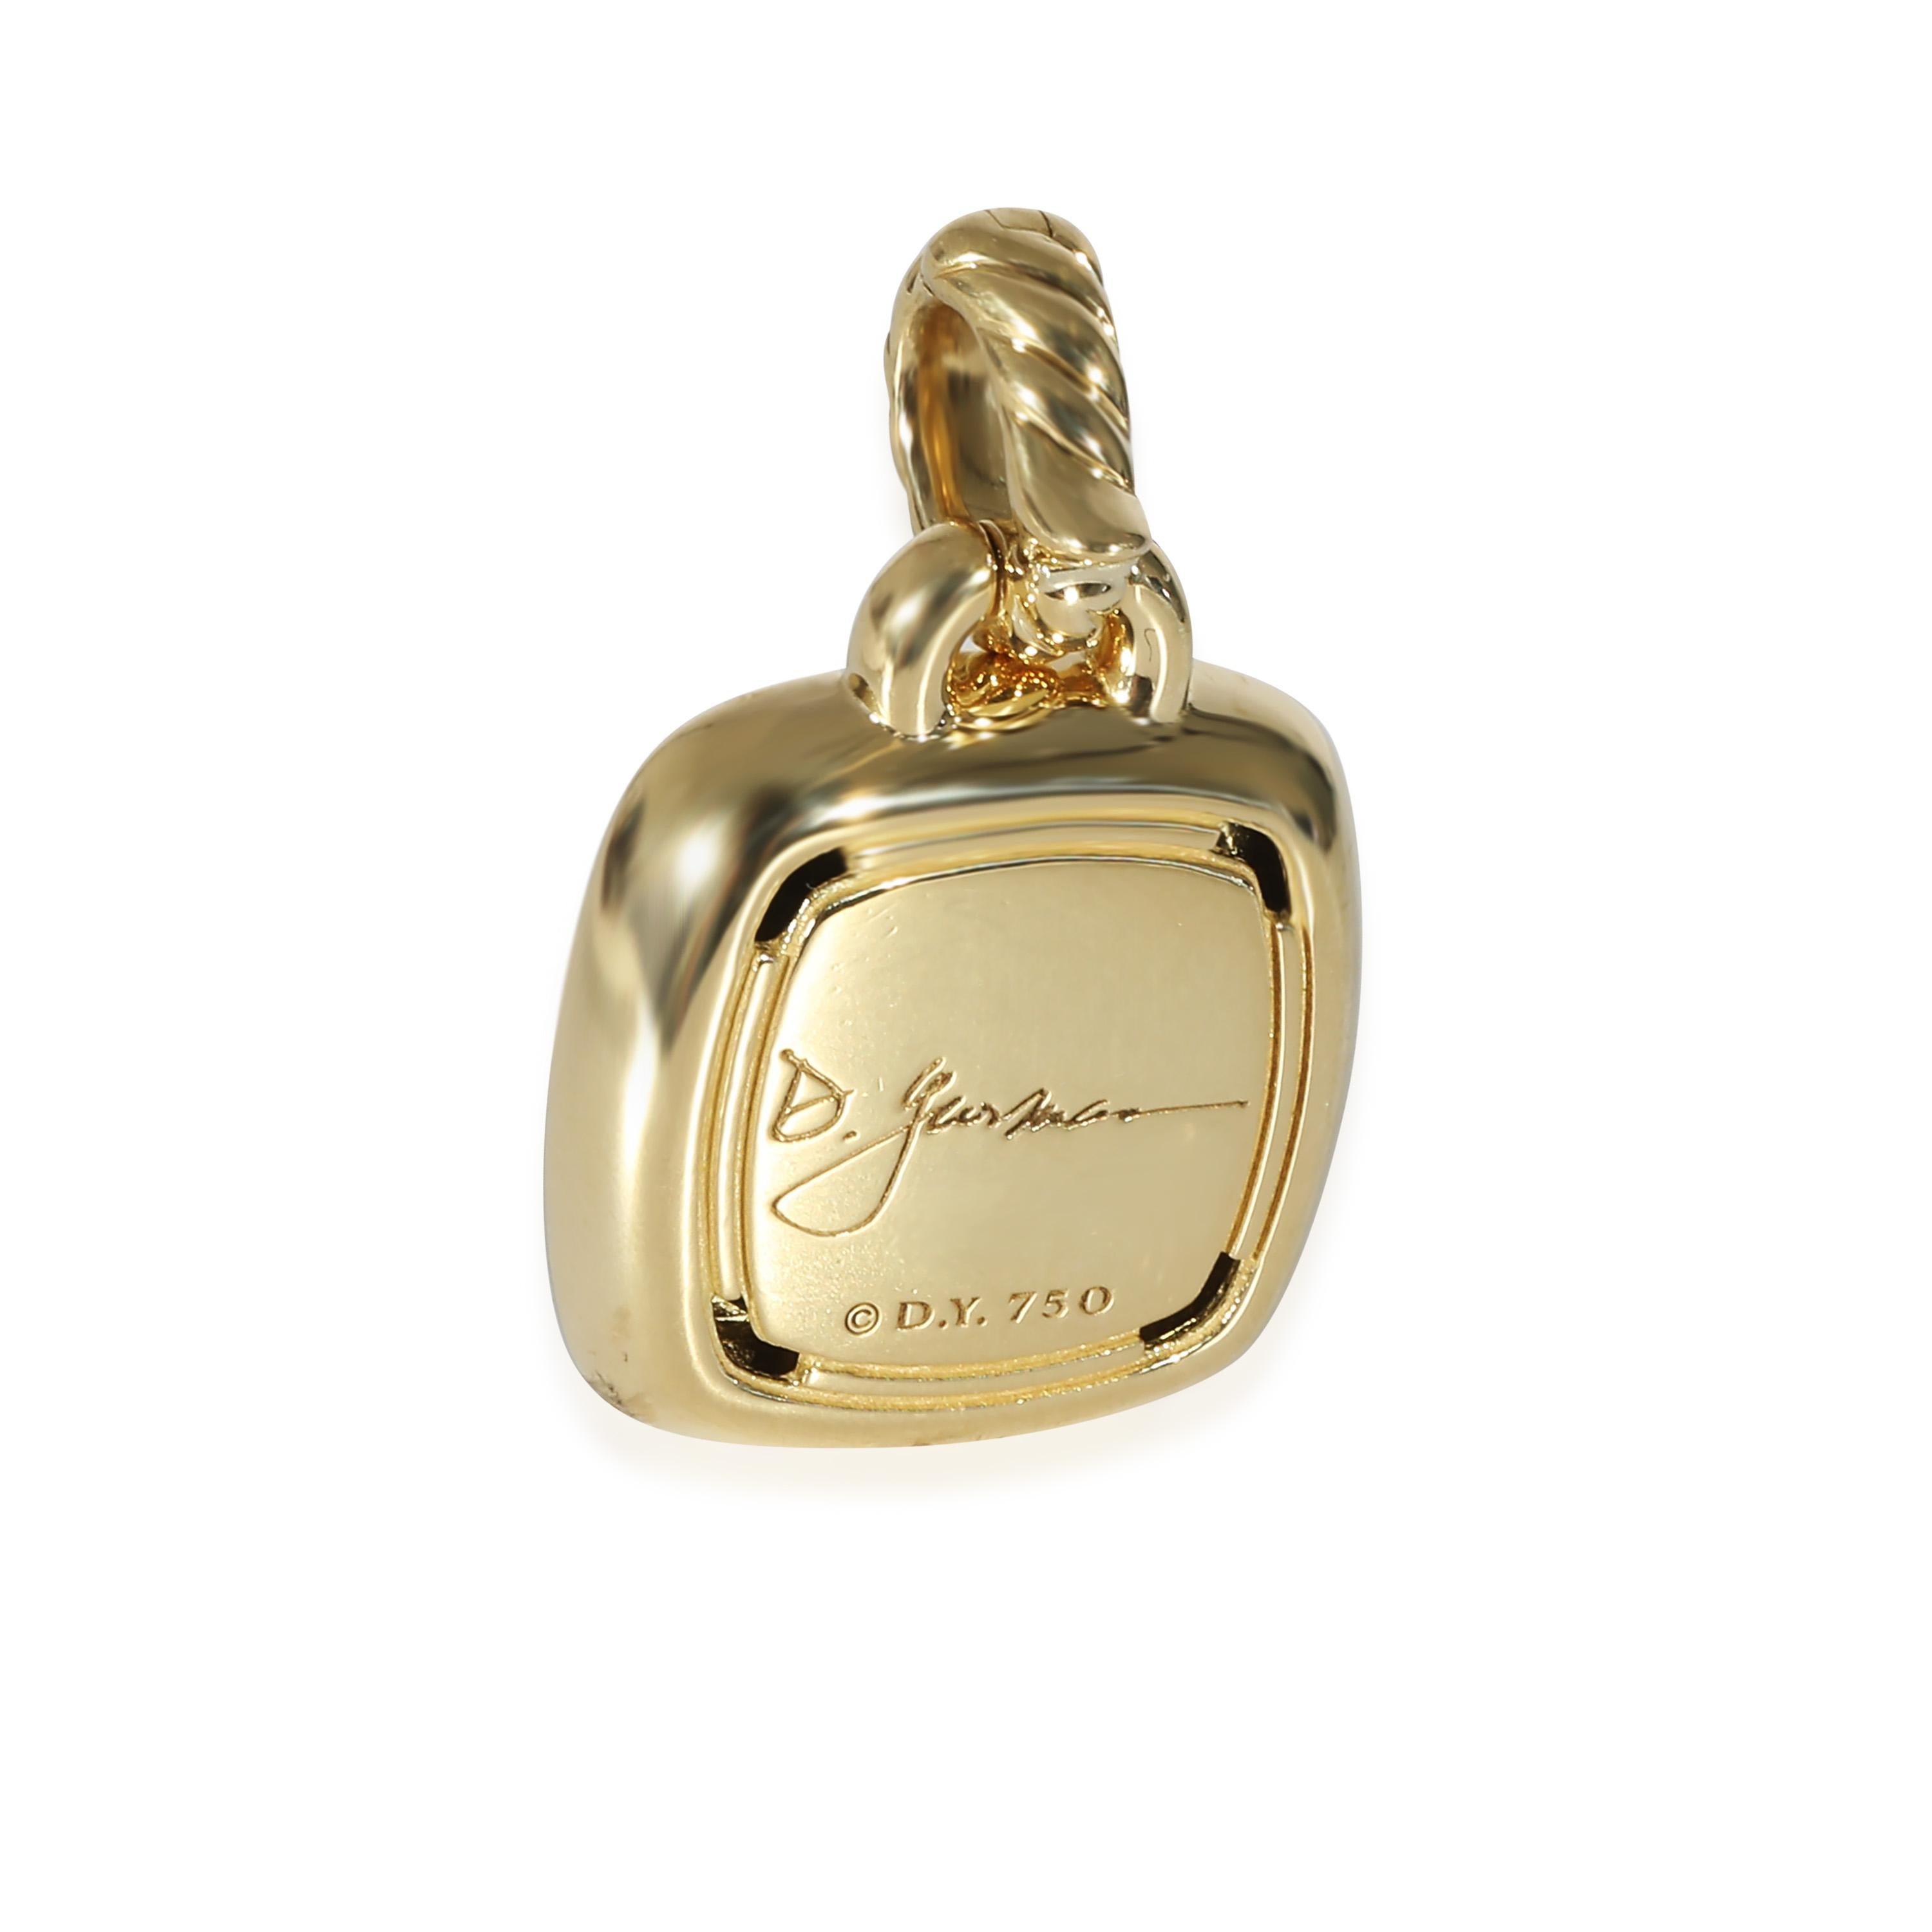 David Yurman Albion Pendant in 18k Yellow Gold 0.33 CTW

PRIMARY DETAILS
SKU: 135456
Listing Title: David Yurman Albion Pendant in 18k Yellow Gold 0.33 CTW
Condition Description: Introduced in 1994 and one of the most recognized and popular line-ups